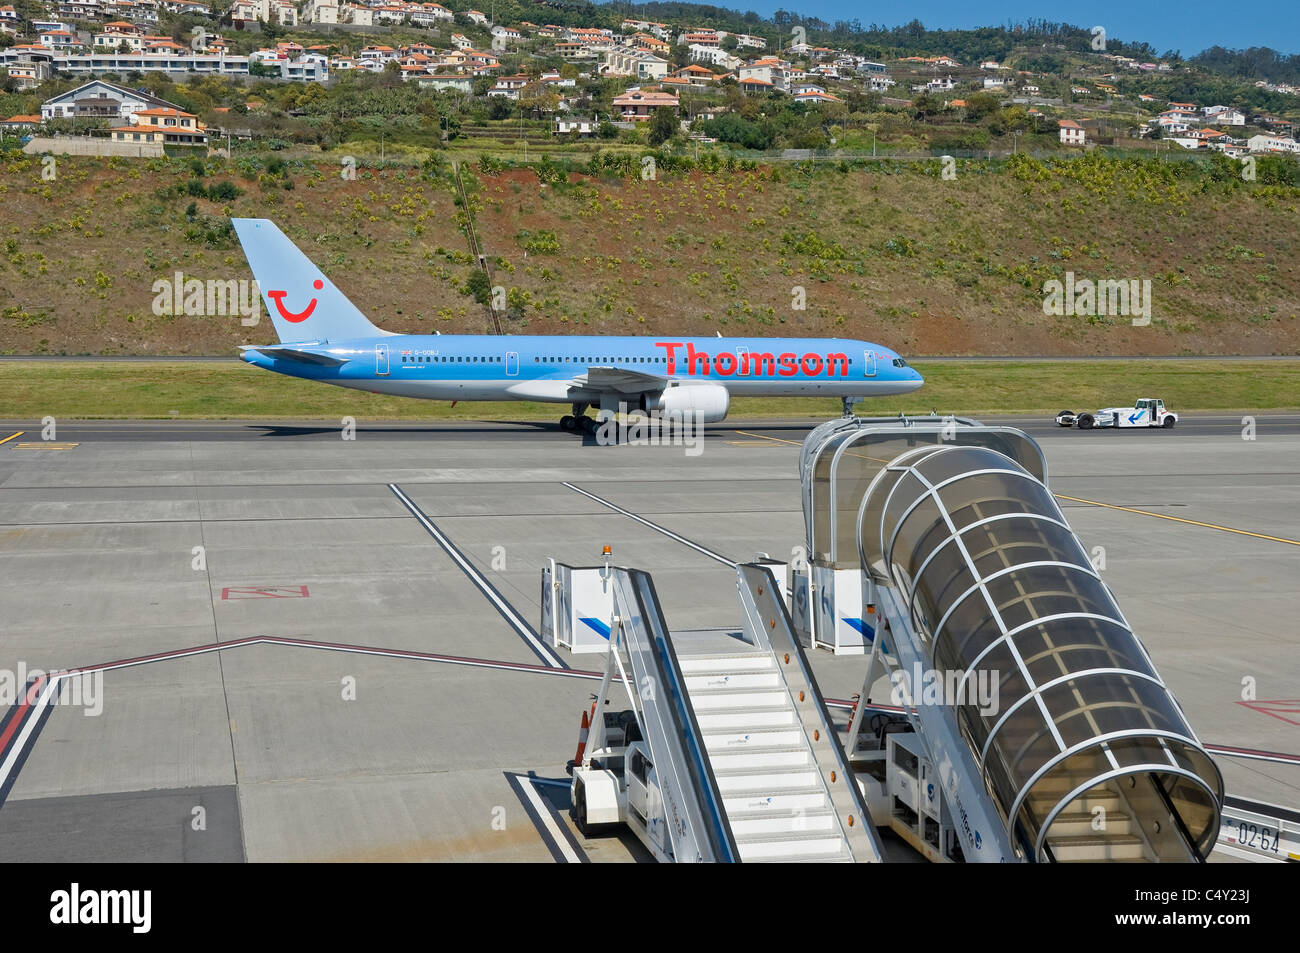 Mobile steps and Thomson plane airplane aircraft on tarmac in background at Funchal airport Madeira Portugal EU Europe Stock Photo